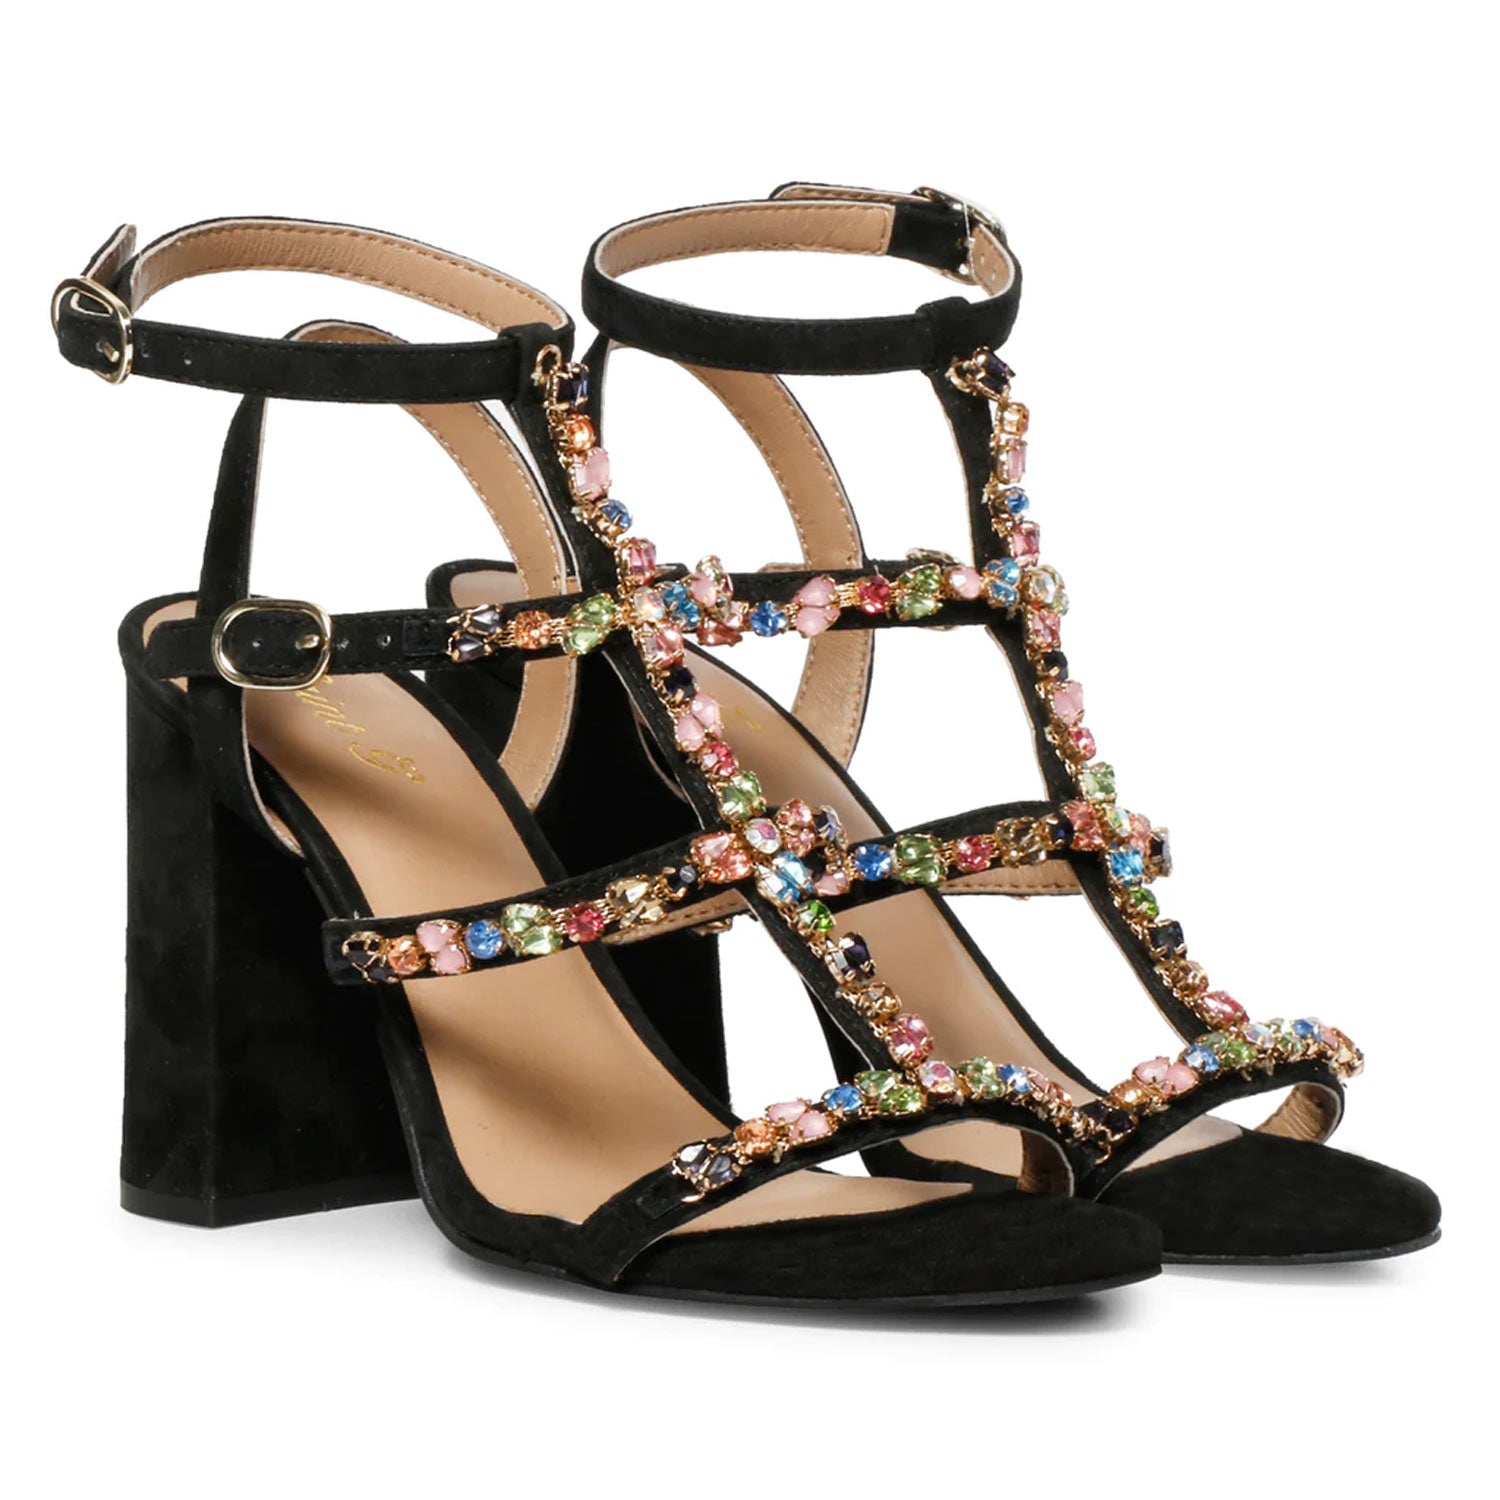 THE SQUARE OPEN SANDAL – Katy Perry Collections